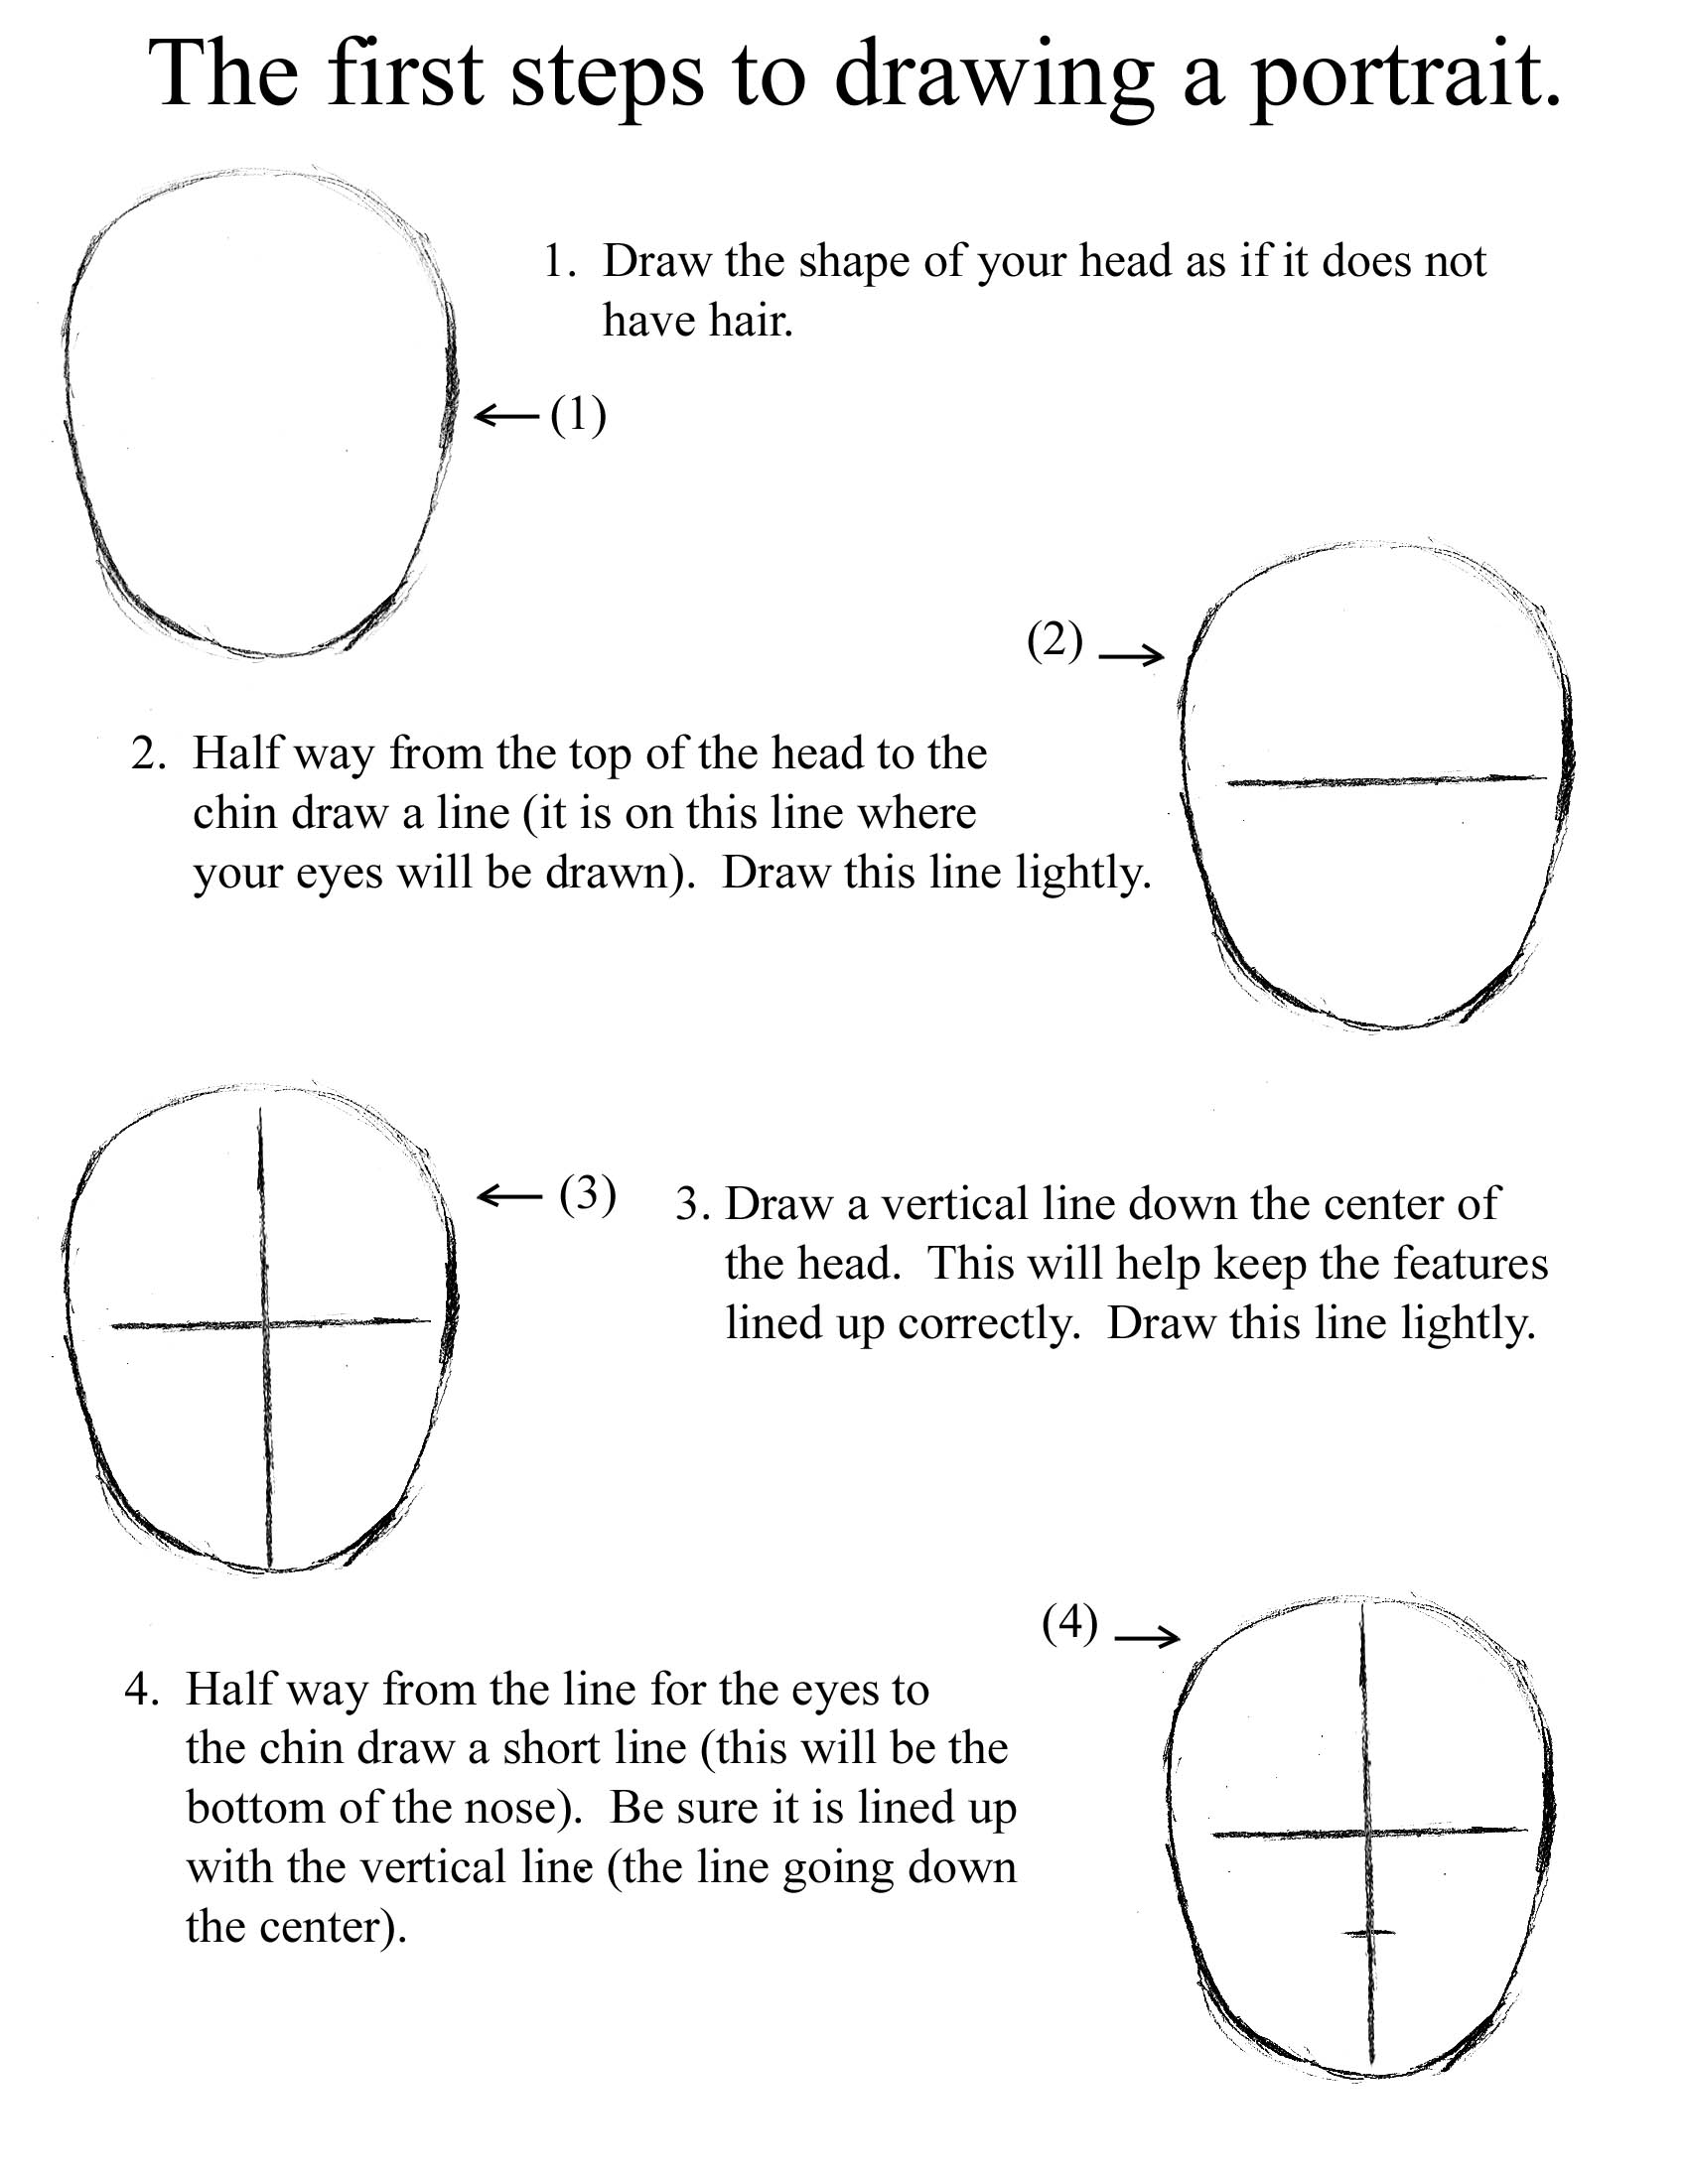 PORTRAIT DRAWINGS step by step instructions